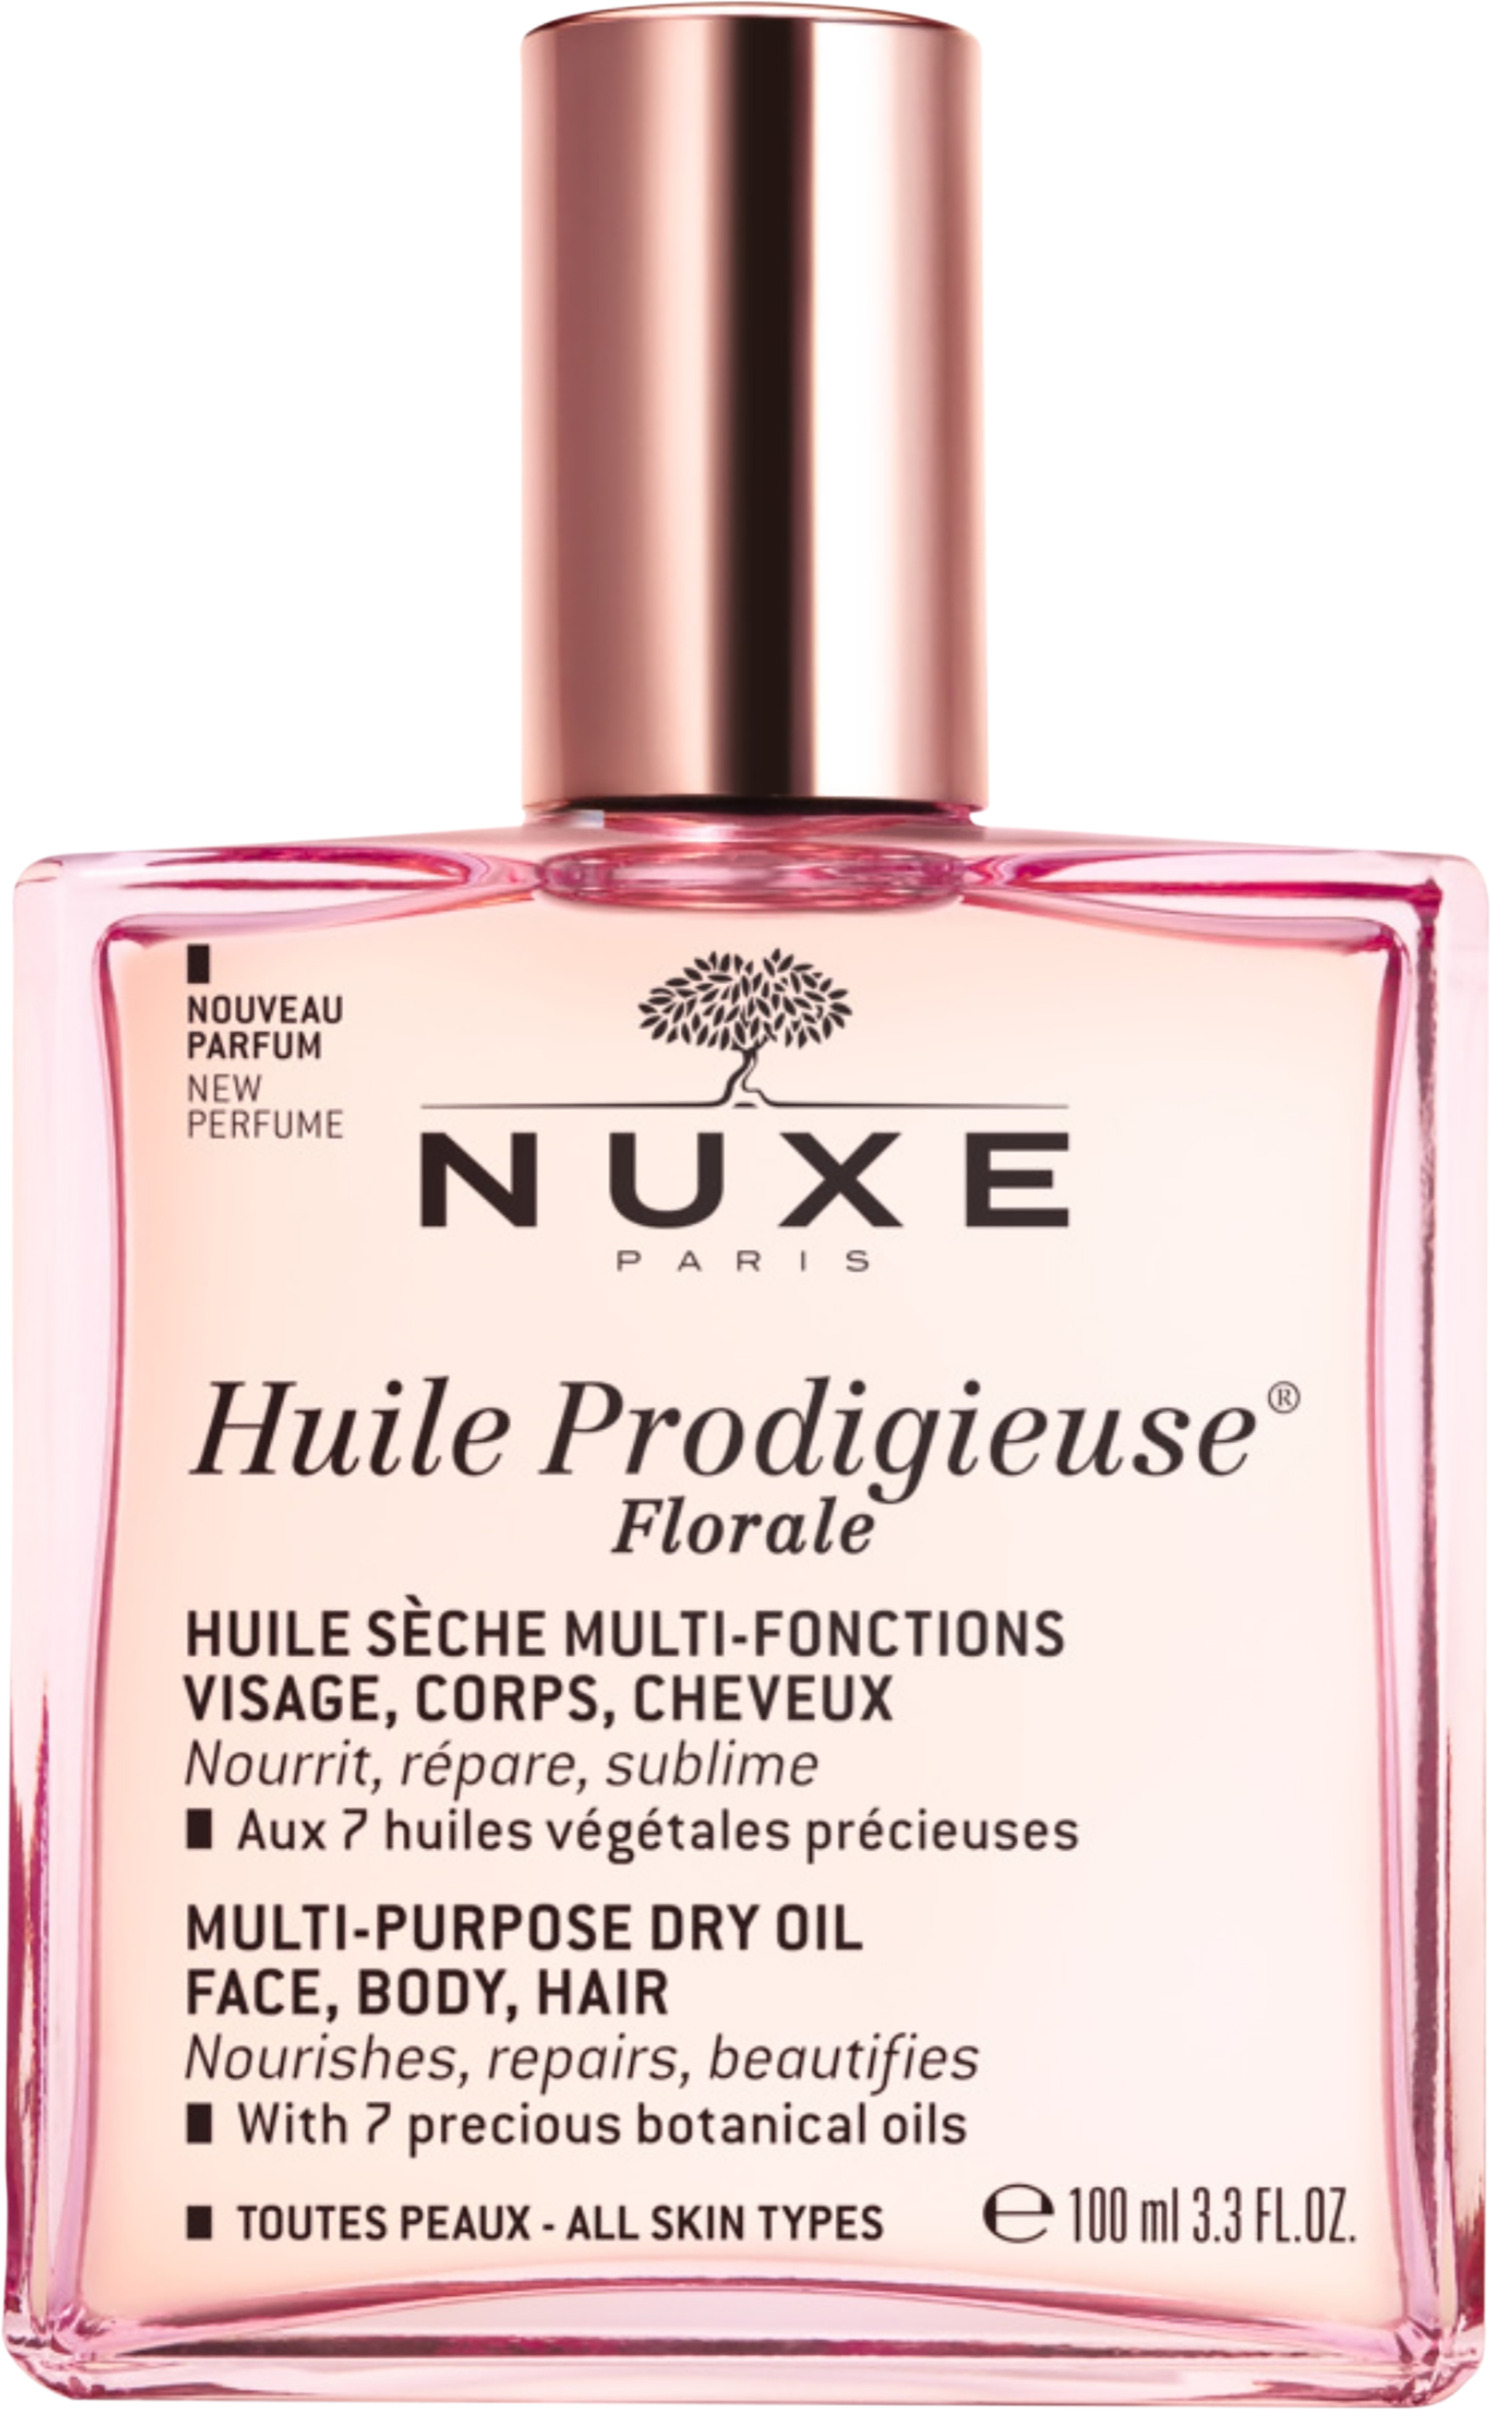 Nuxe Huile Prodigieuse Dry Oil Florale 100 ml